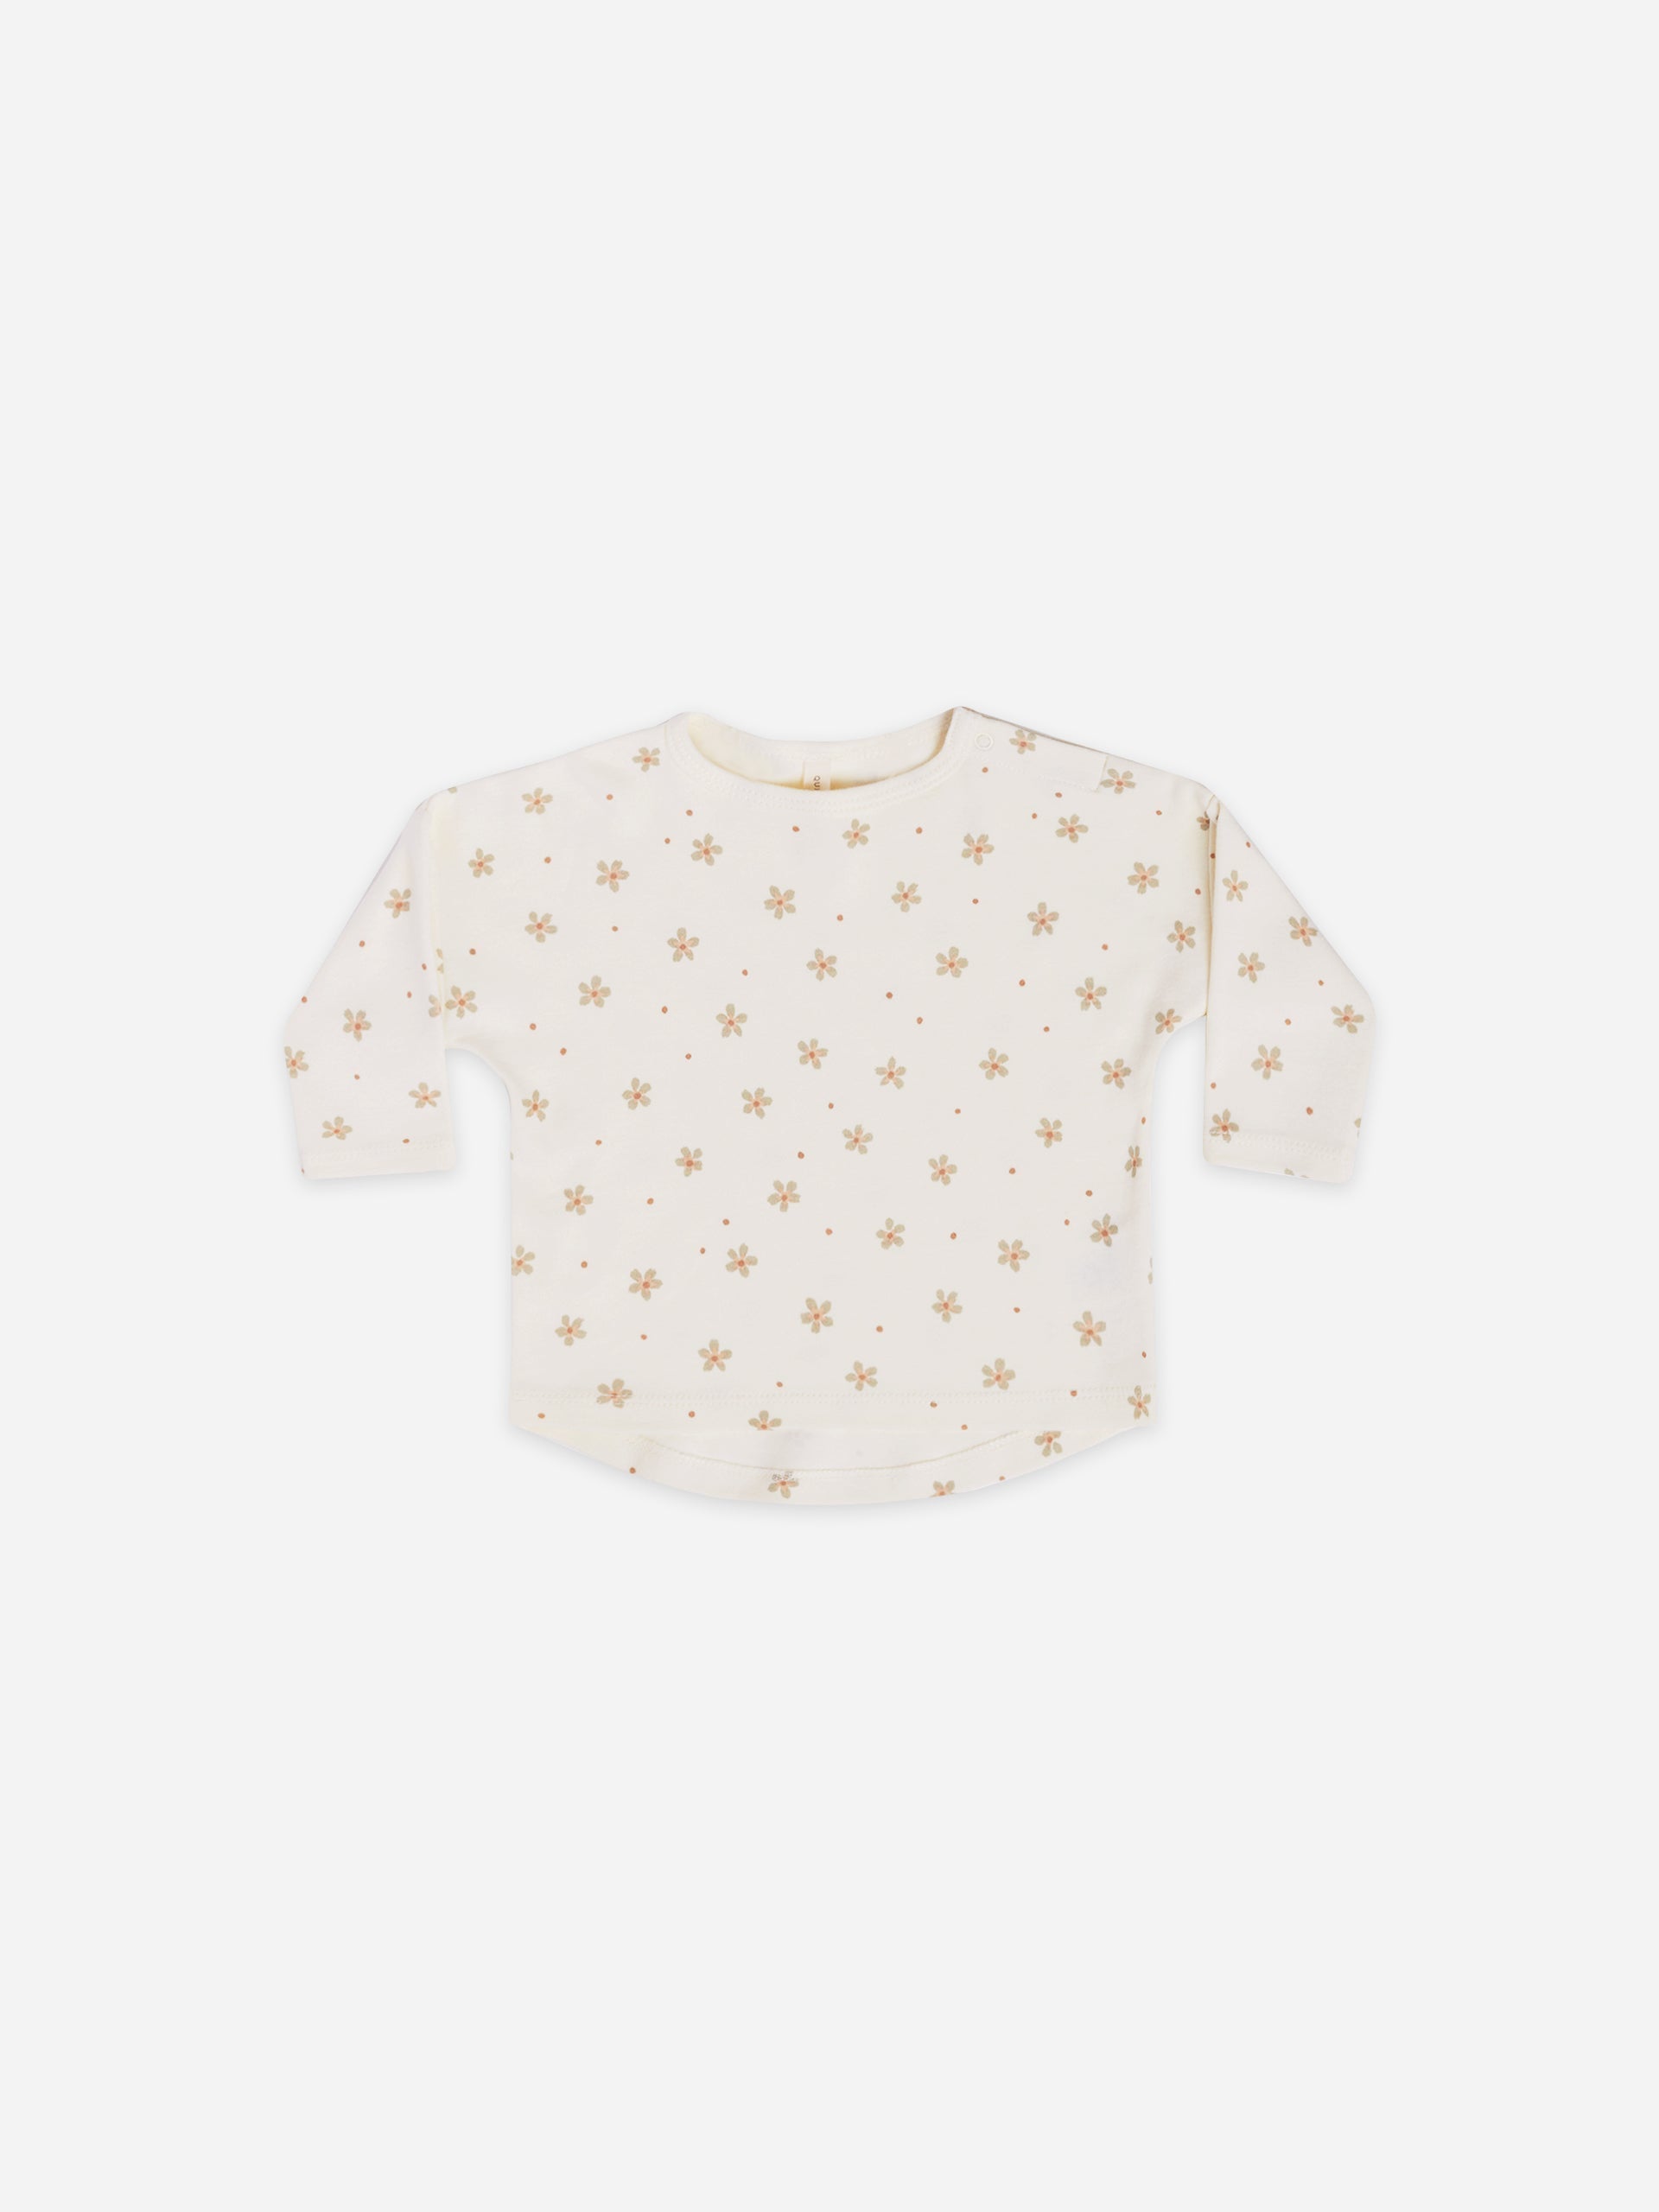 long sleeve tee | dotty floral - Quincy Mae | Baby Basics | Baby Clothing | Organic Baby Clothes | Modern Baby Boy Clothes |